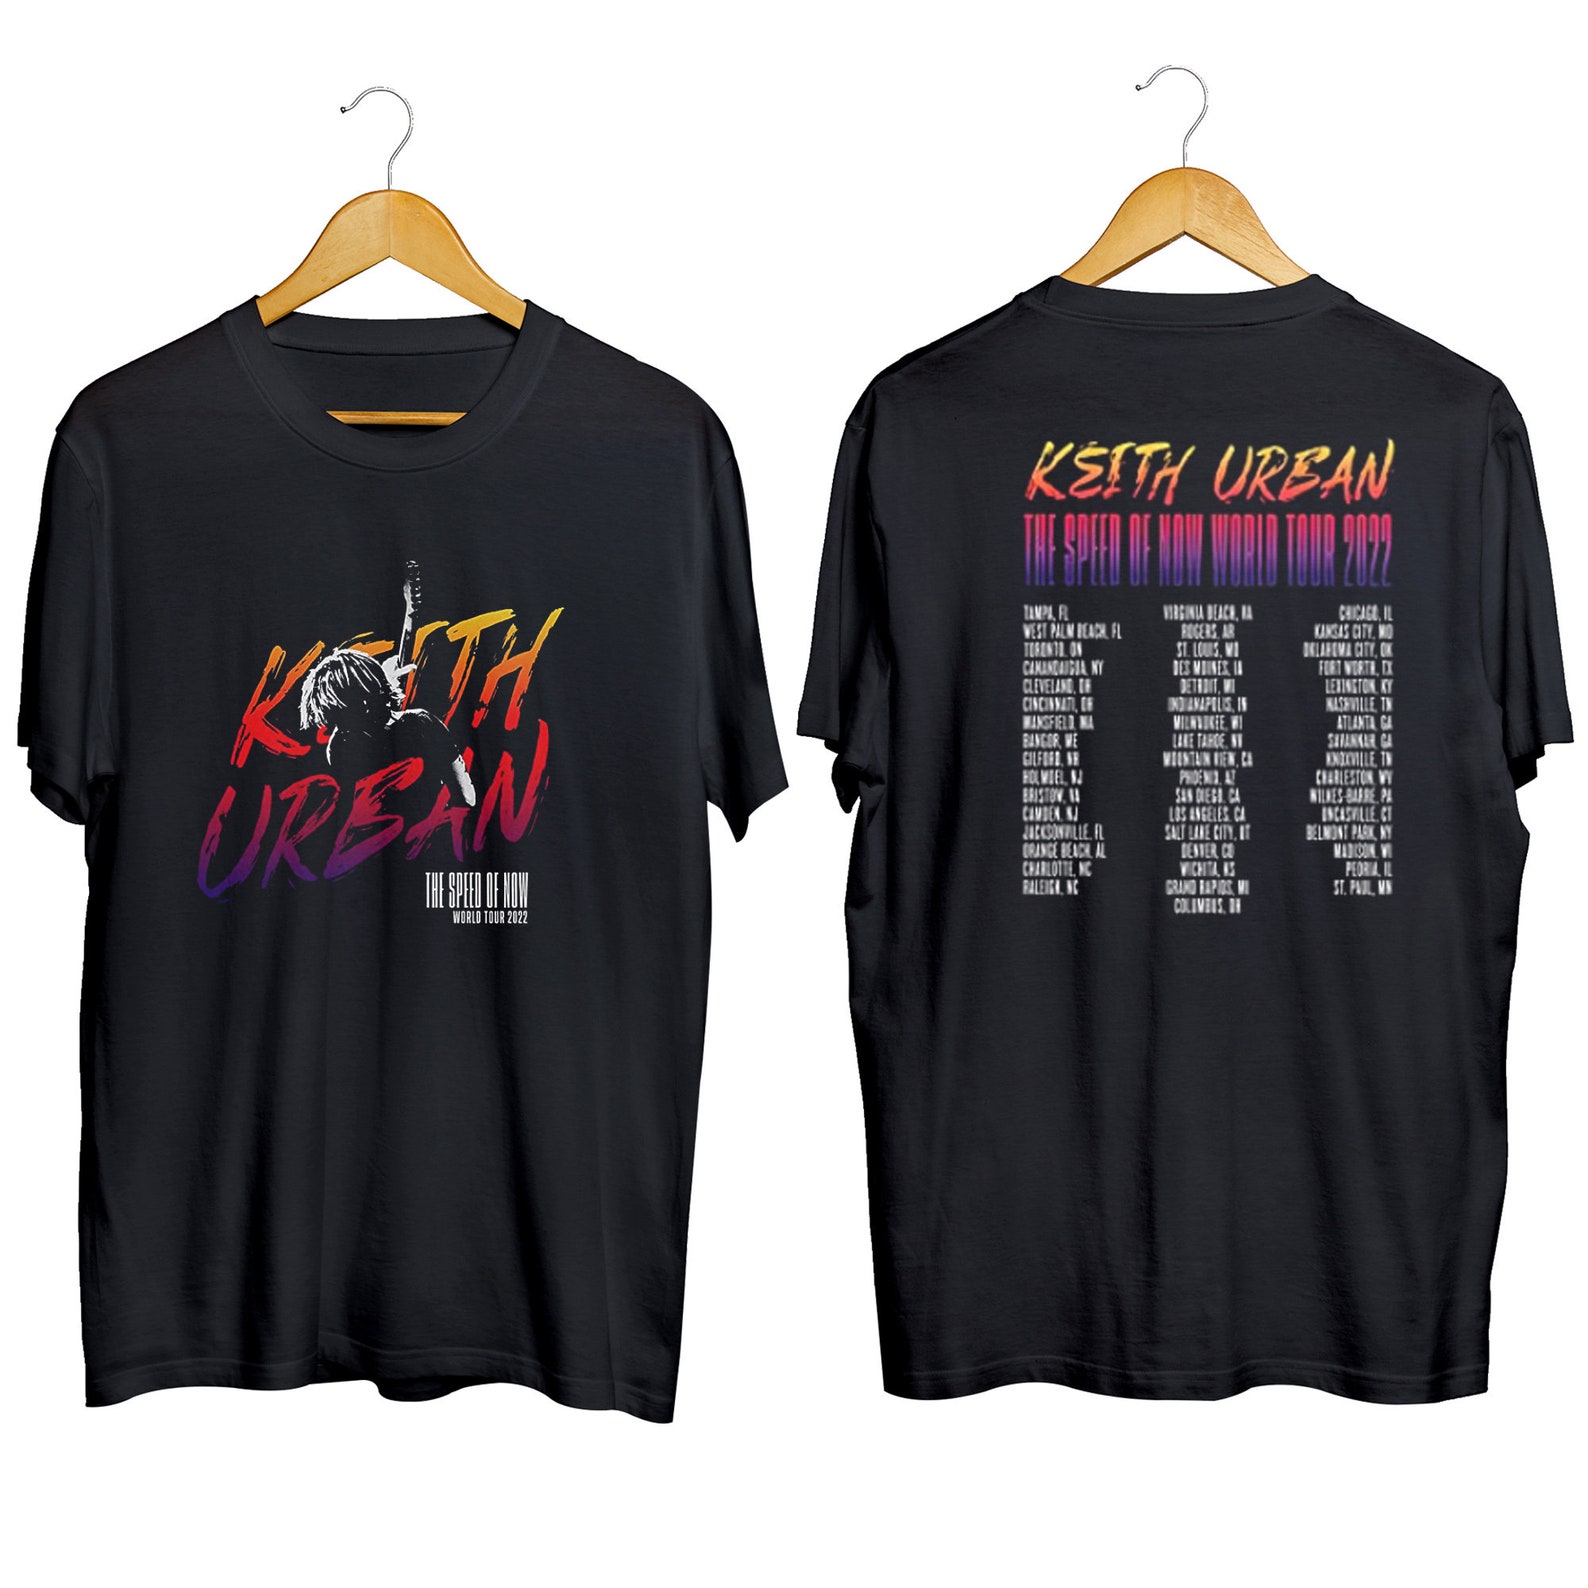 Keith Urban the Speed of Now World Tour 2022 T-shirt Black - Etsy